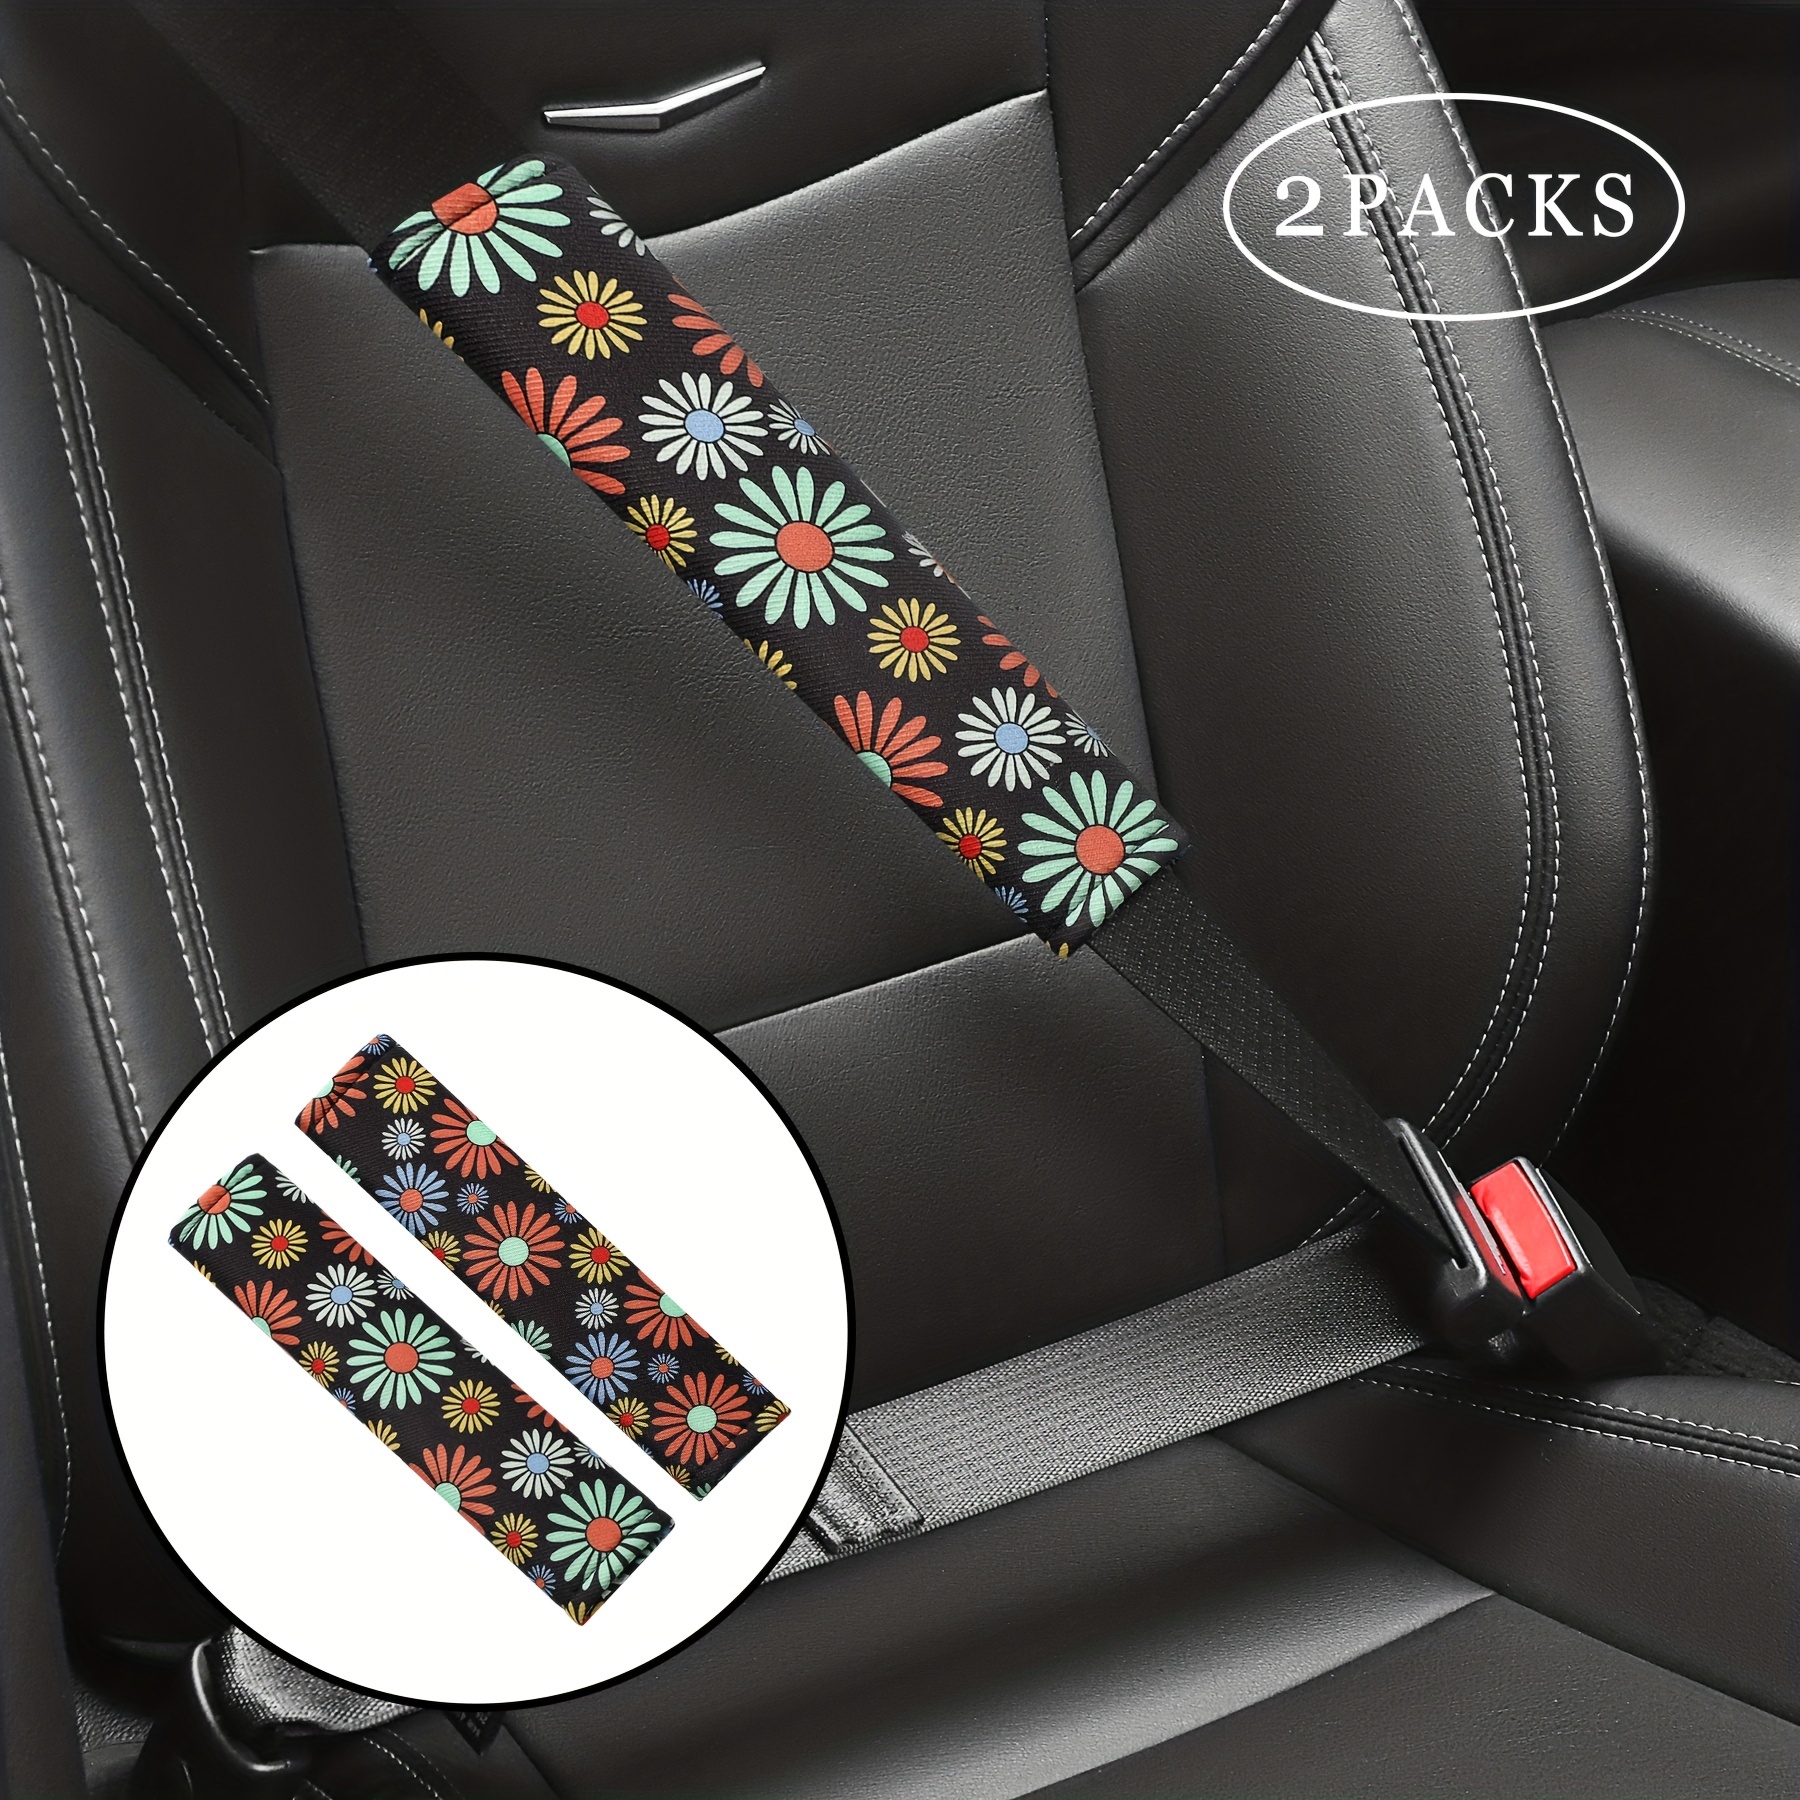 1pc/2pcs Set Of Fashionable Small Daisy Print, Soft And Comfortable Car  Seat Belt Cover, Silicone Anti-skid Particle Inner Material Shoulder  Protector